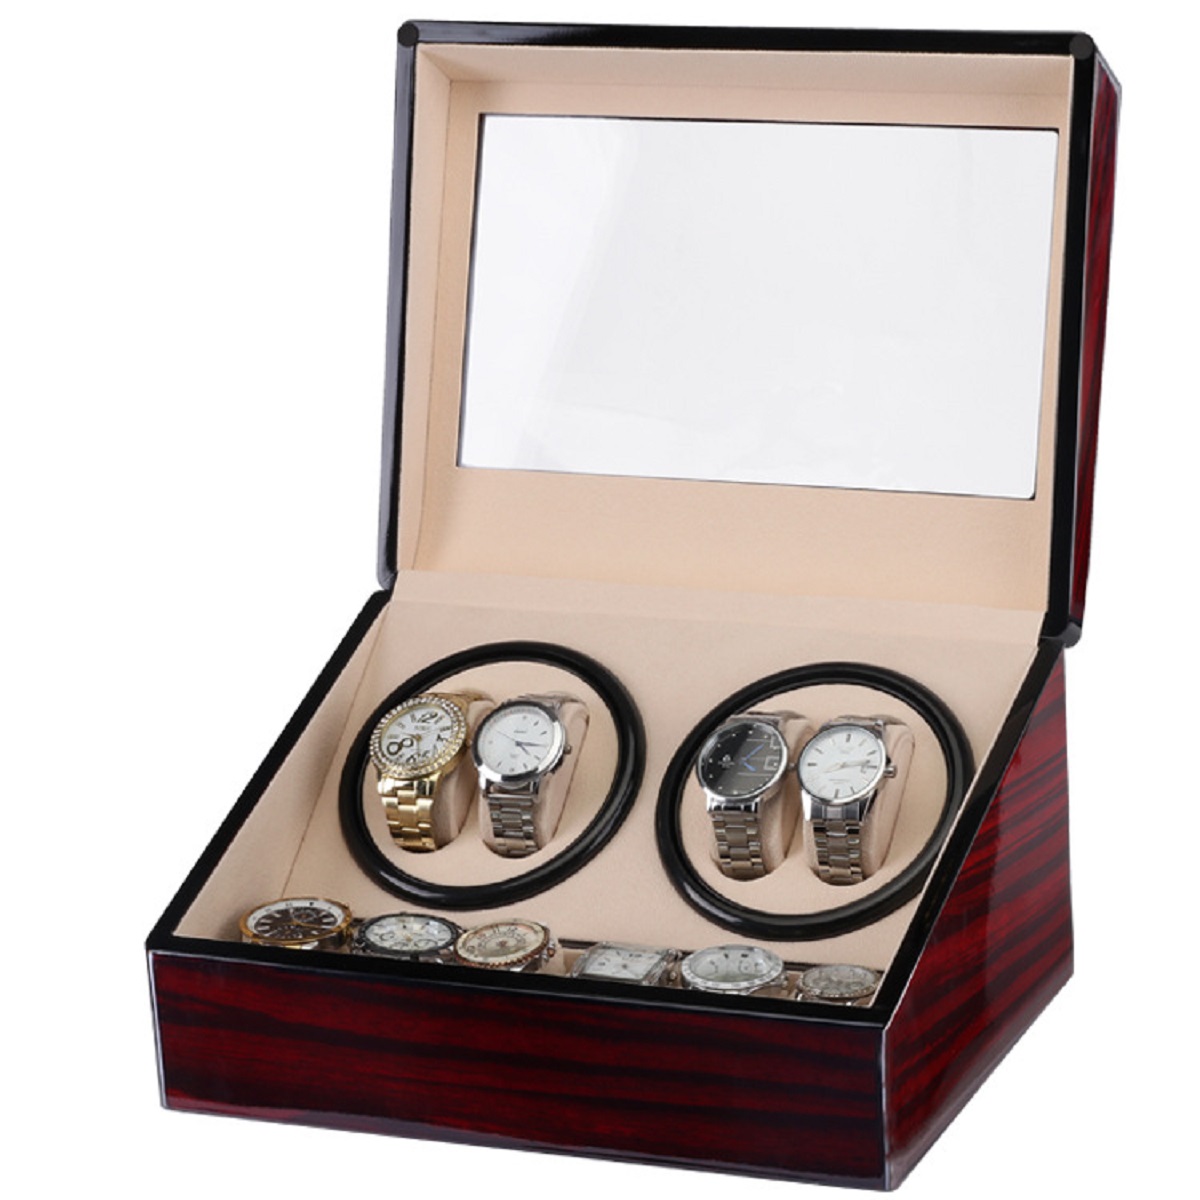 High Gloss PU Painted 4+6 Automatic Watch Winder with Watch Storage for 10 watches